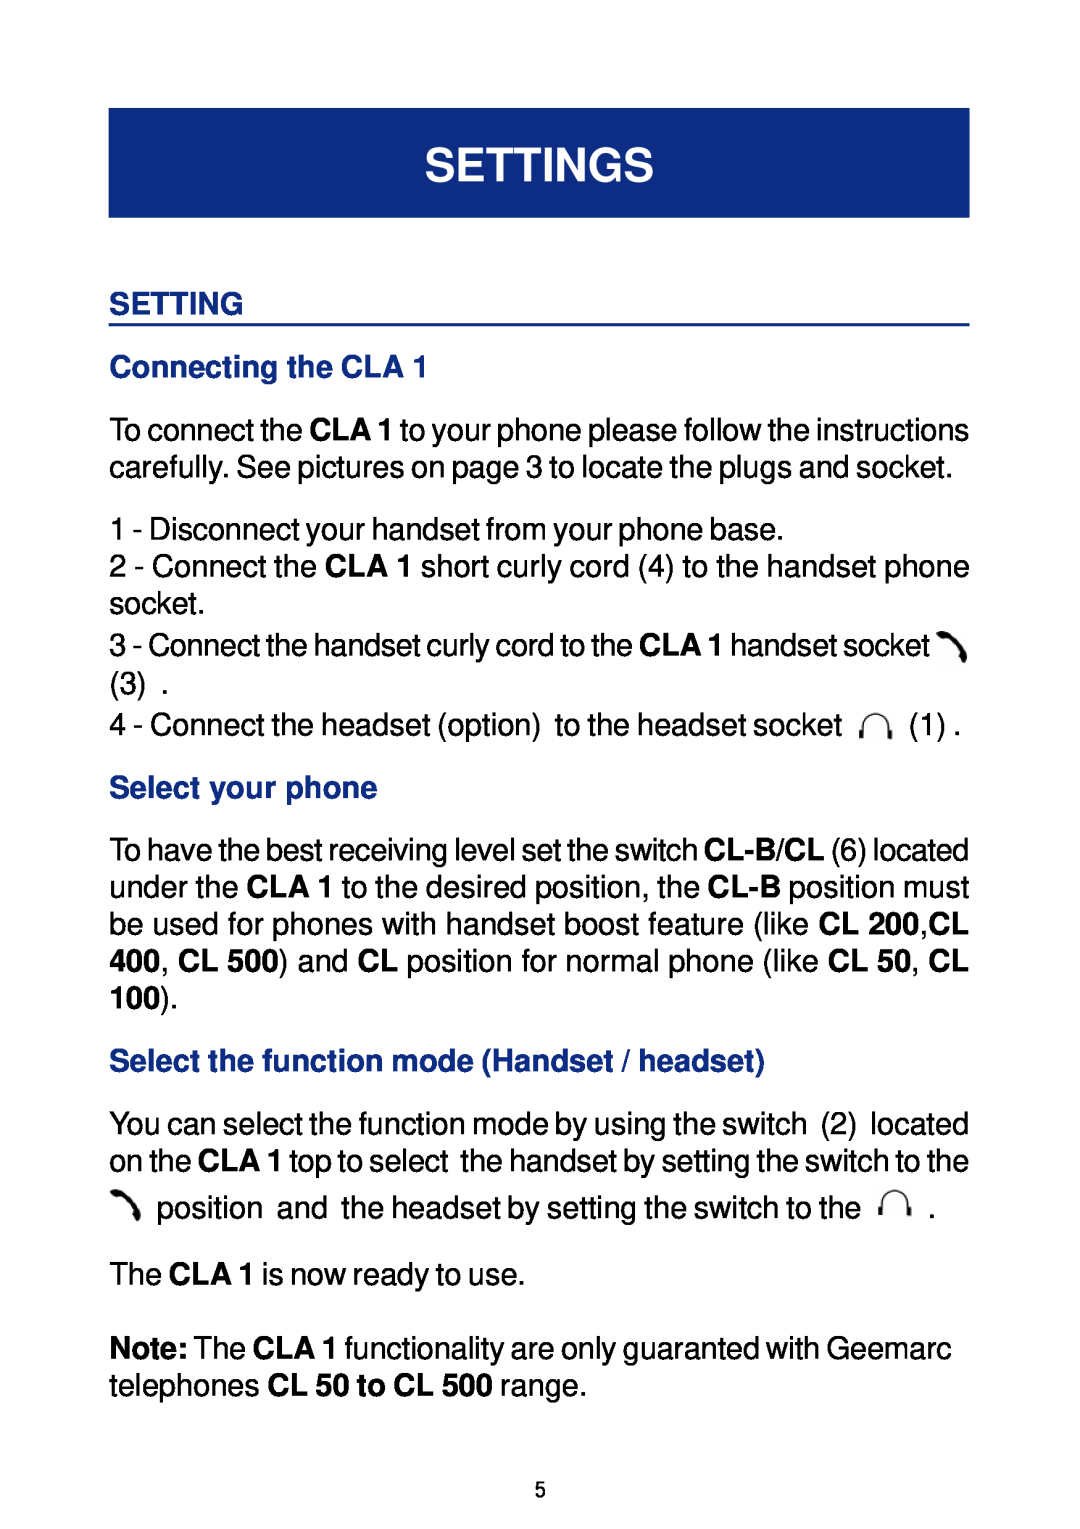 Geemarc CLA 1 manual Settings, SETTING Connecting the CLA, Select your phone, Select the function mode Handset / headset 